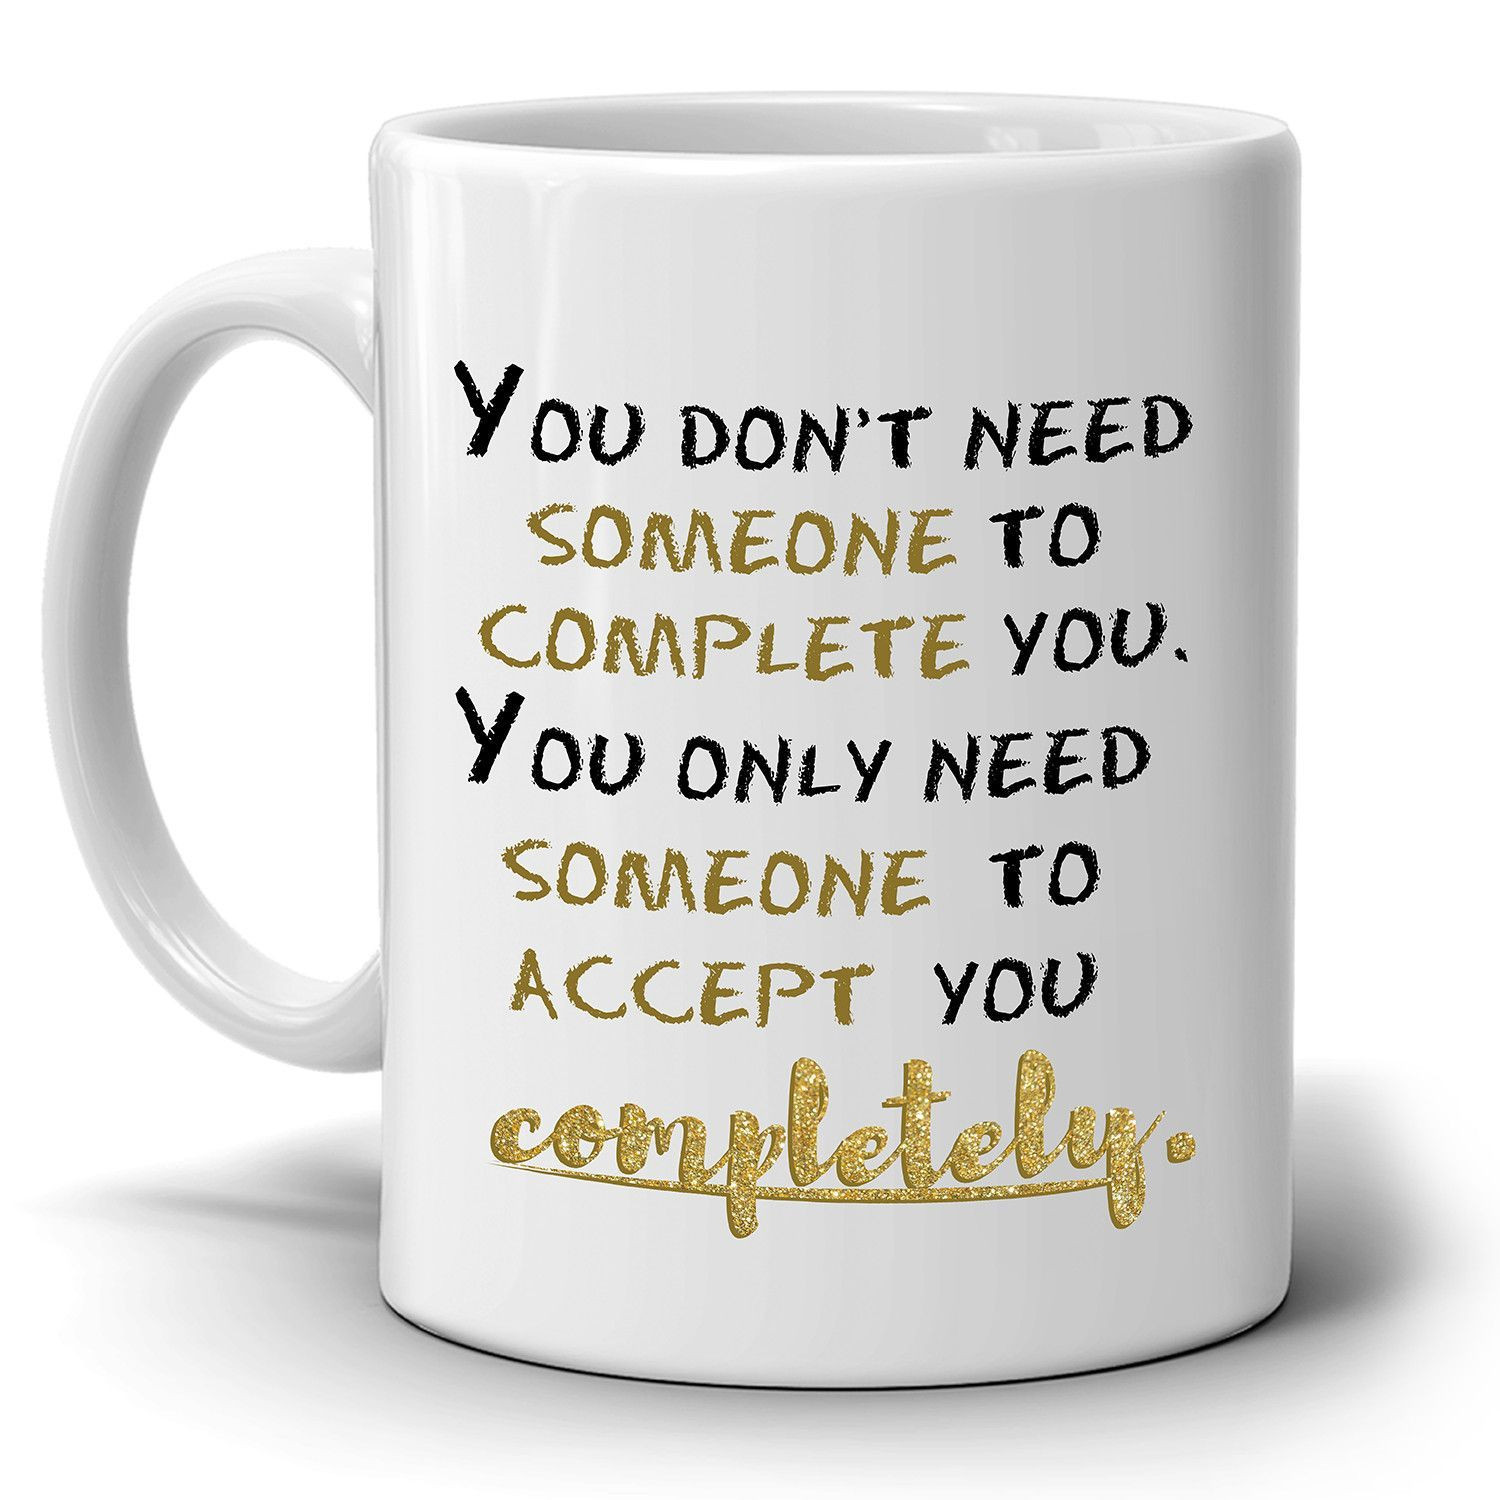 Couple Gift Ideas For Him
 Romantic Gifts for Him and Her Coffee Mug Perfect for